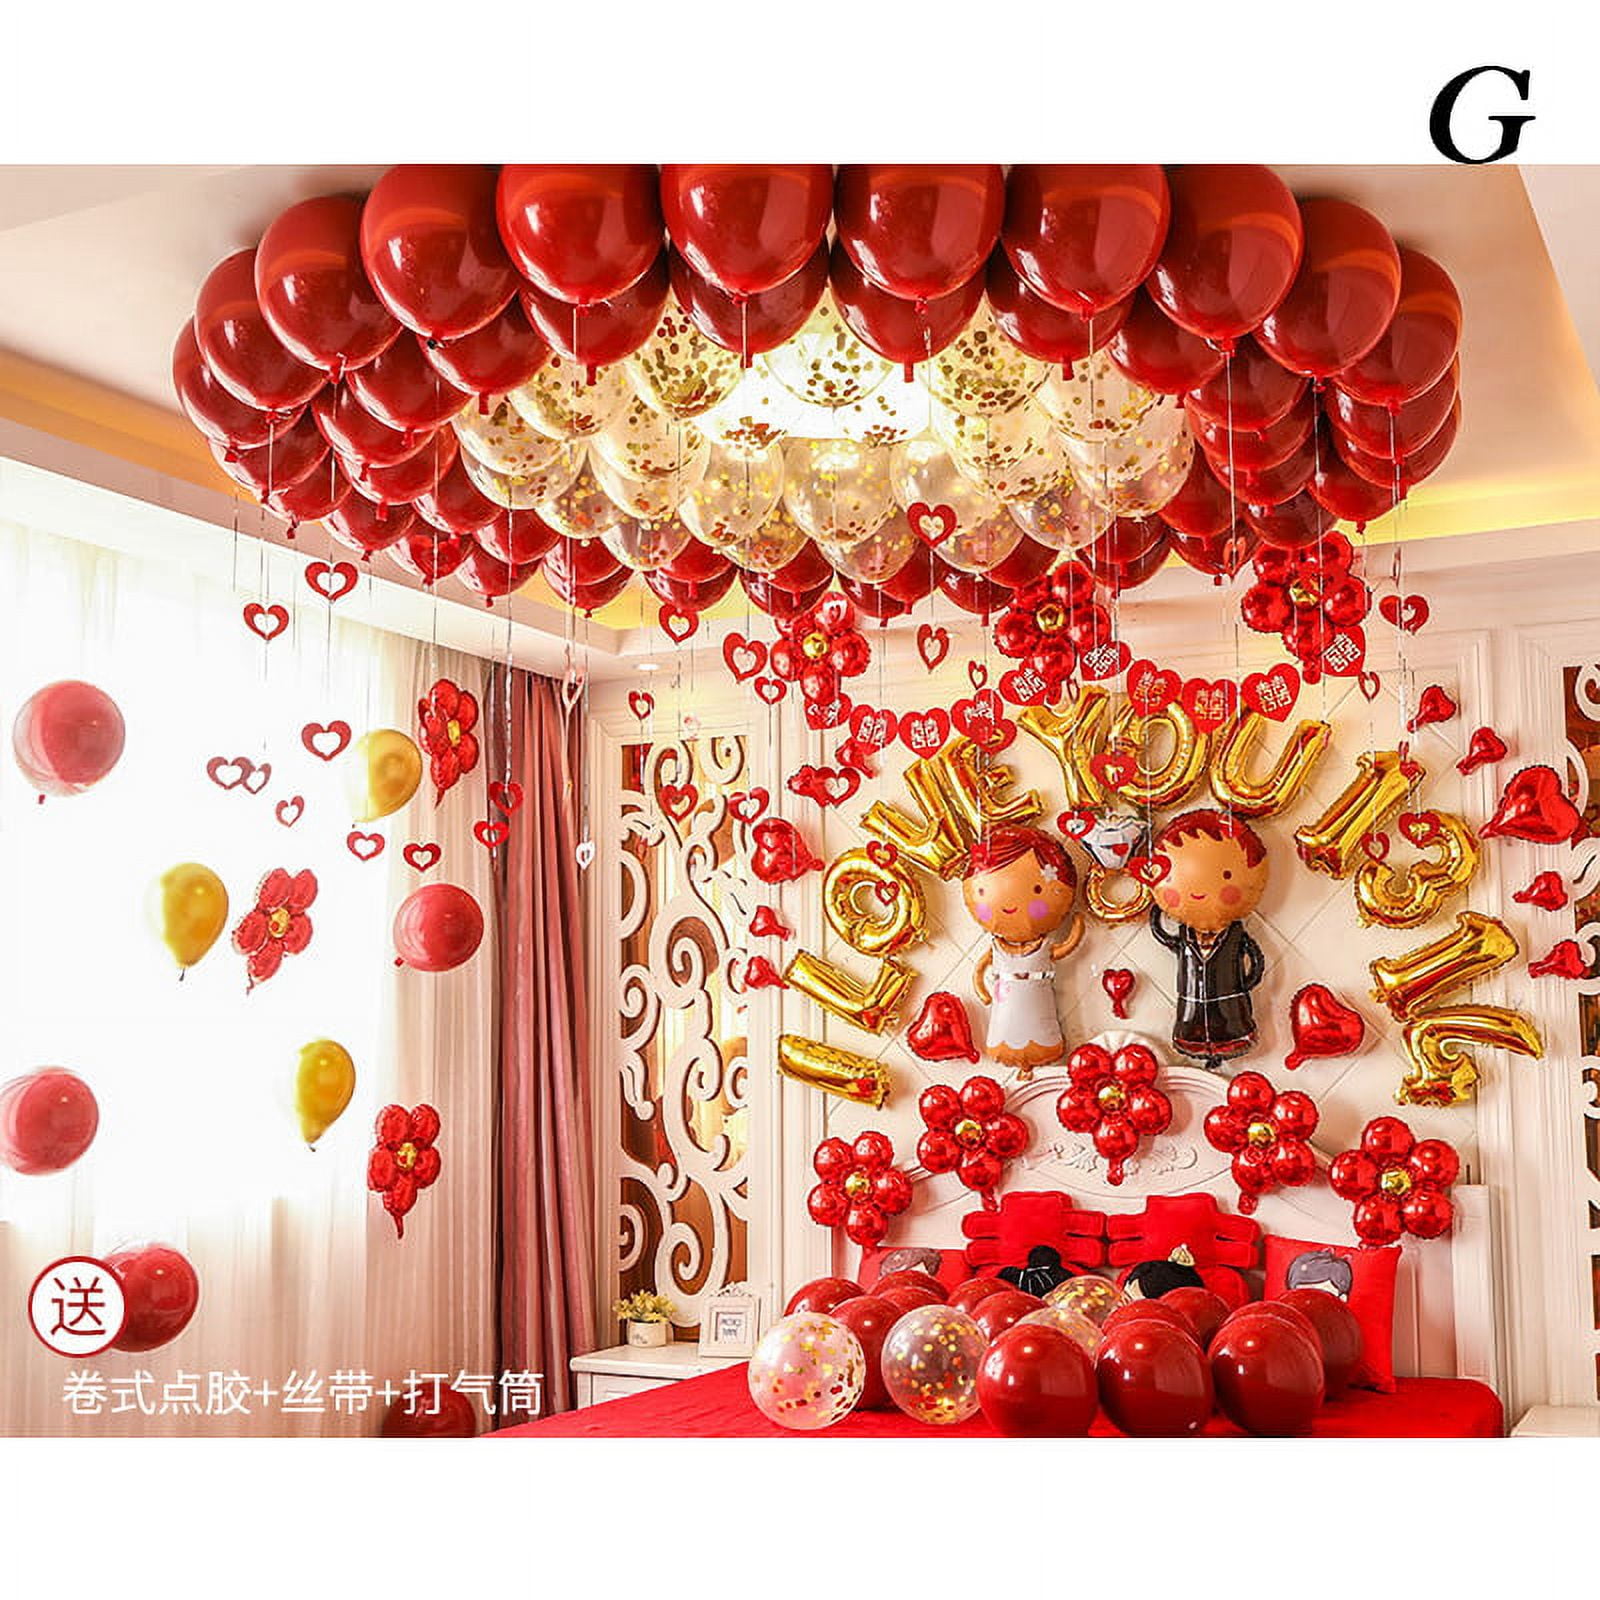 Romantic Birthday Balloon Decoration in Rose Gold Theme with Number Digits  | Mumbai